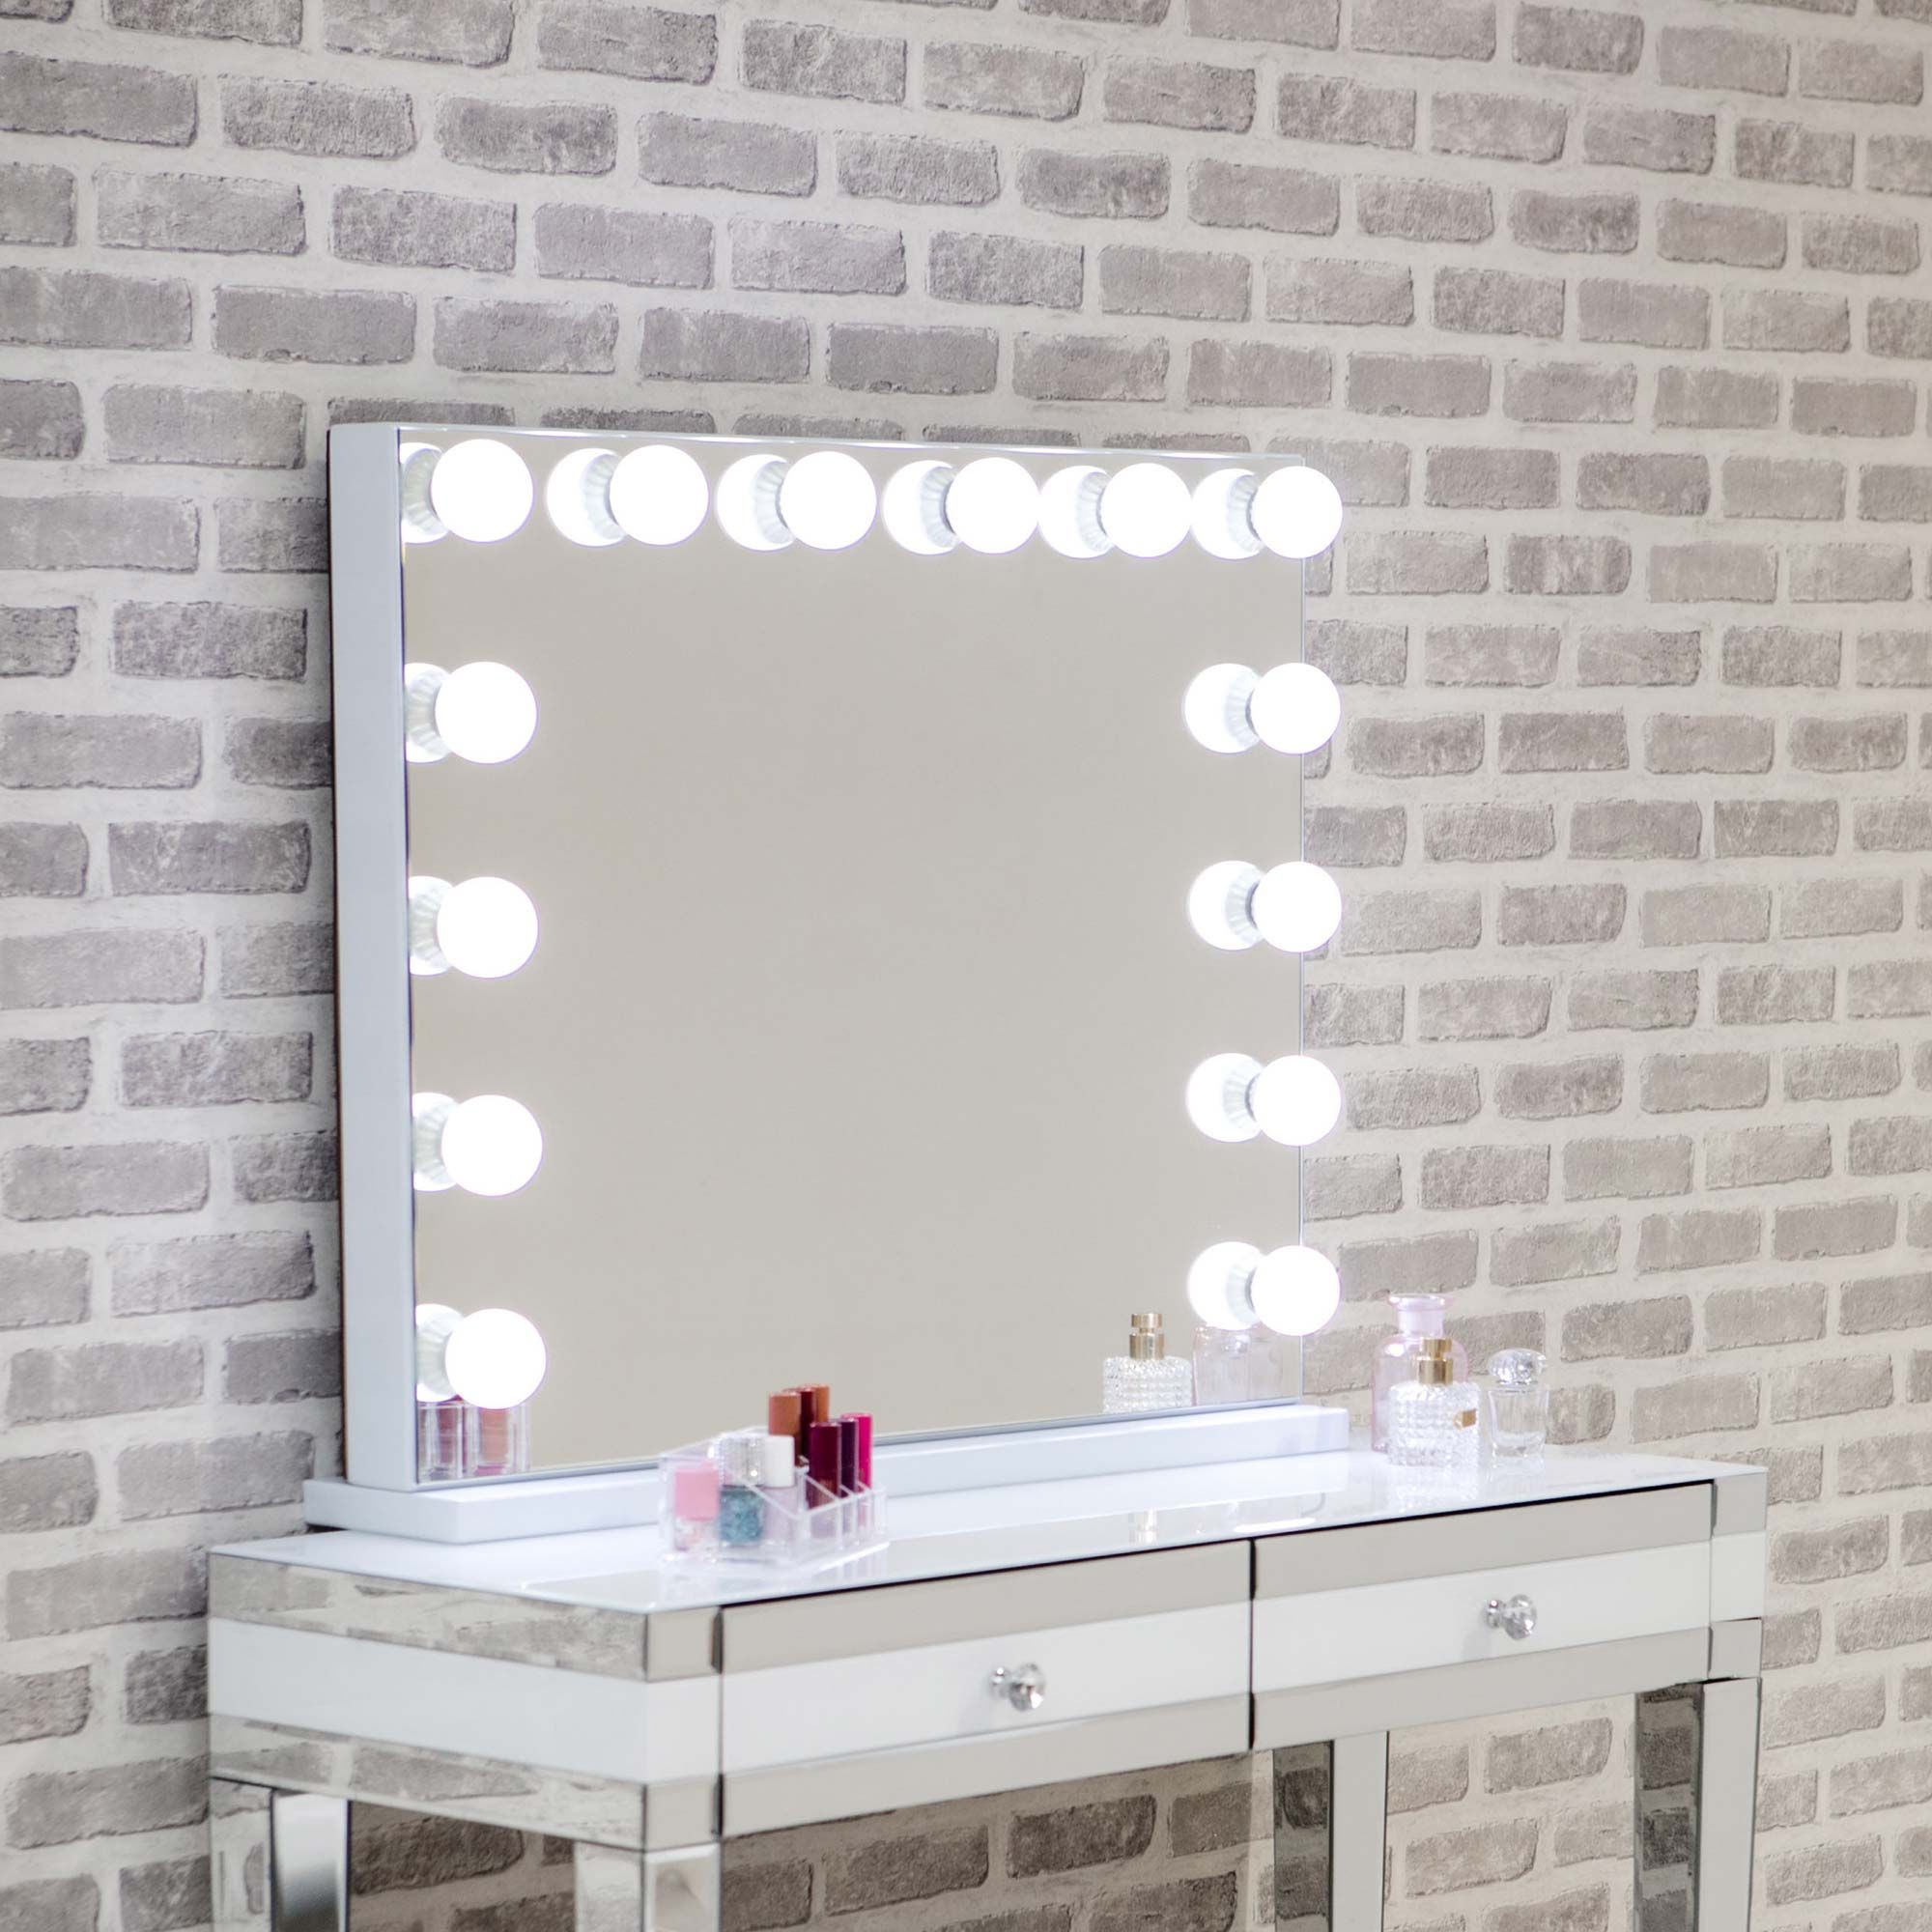 Hollywood Glamour Vanity Mirror Shop Online Great Value Meubles